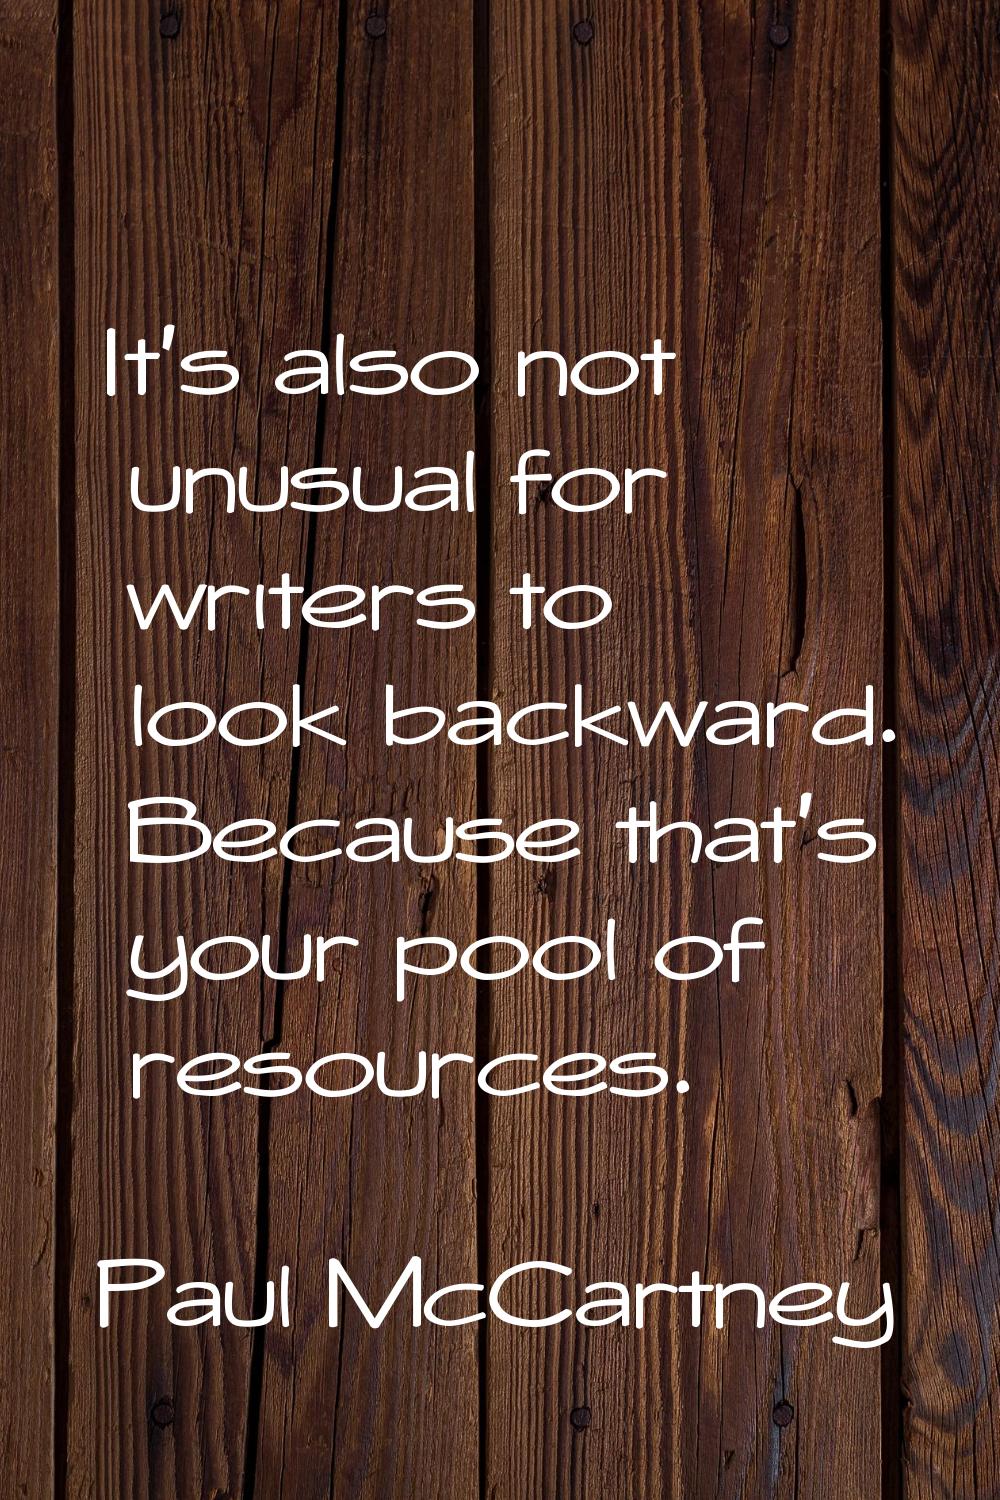 It's also not unusual for writers to look backward. Because that's your pool of resources.